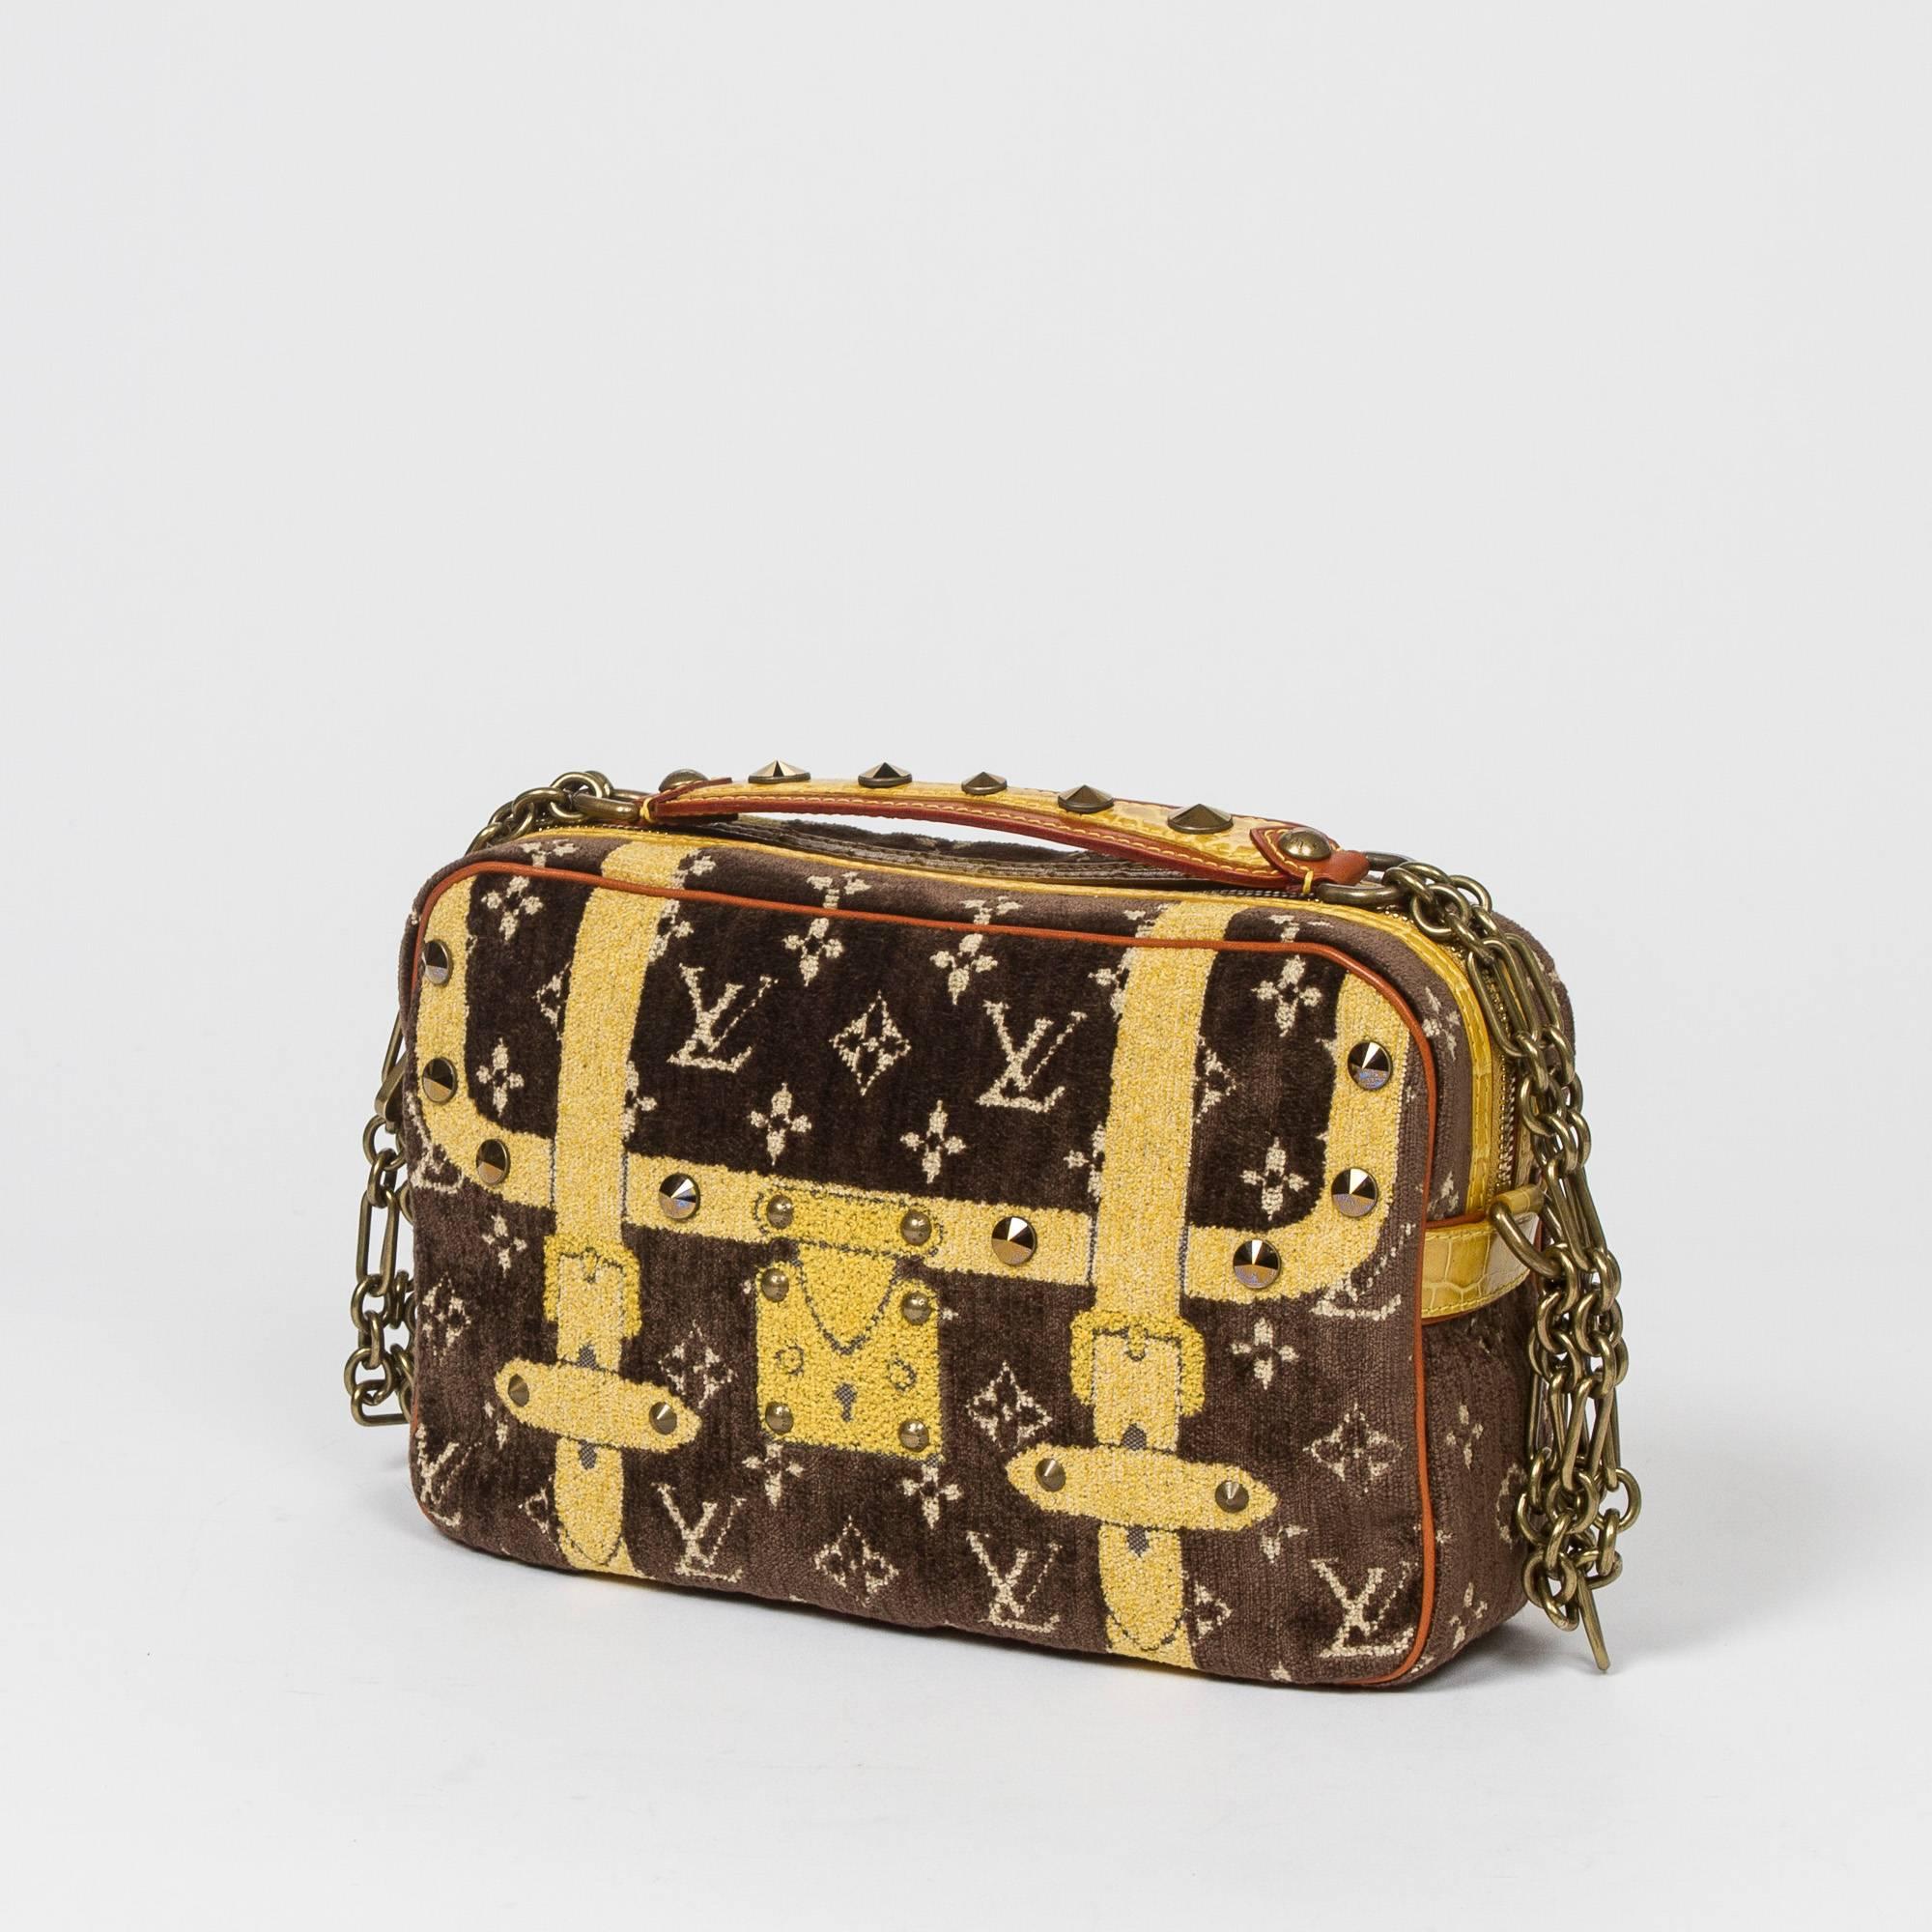 Trompe L'Oeil Pochette Runway 2004-2005 Fall/Winter Collection in brown, beige and yellow monogram motif terrycloth with crystal studs, yellow alligator skin and vachetta accents and antique gold tone chain strap. Top zip closure. Brown leather